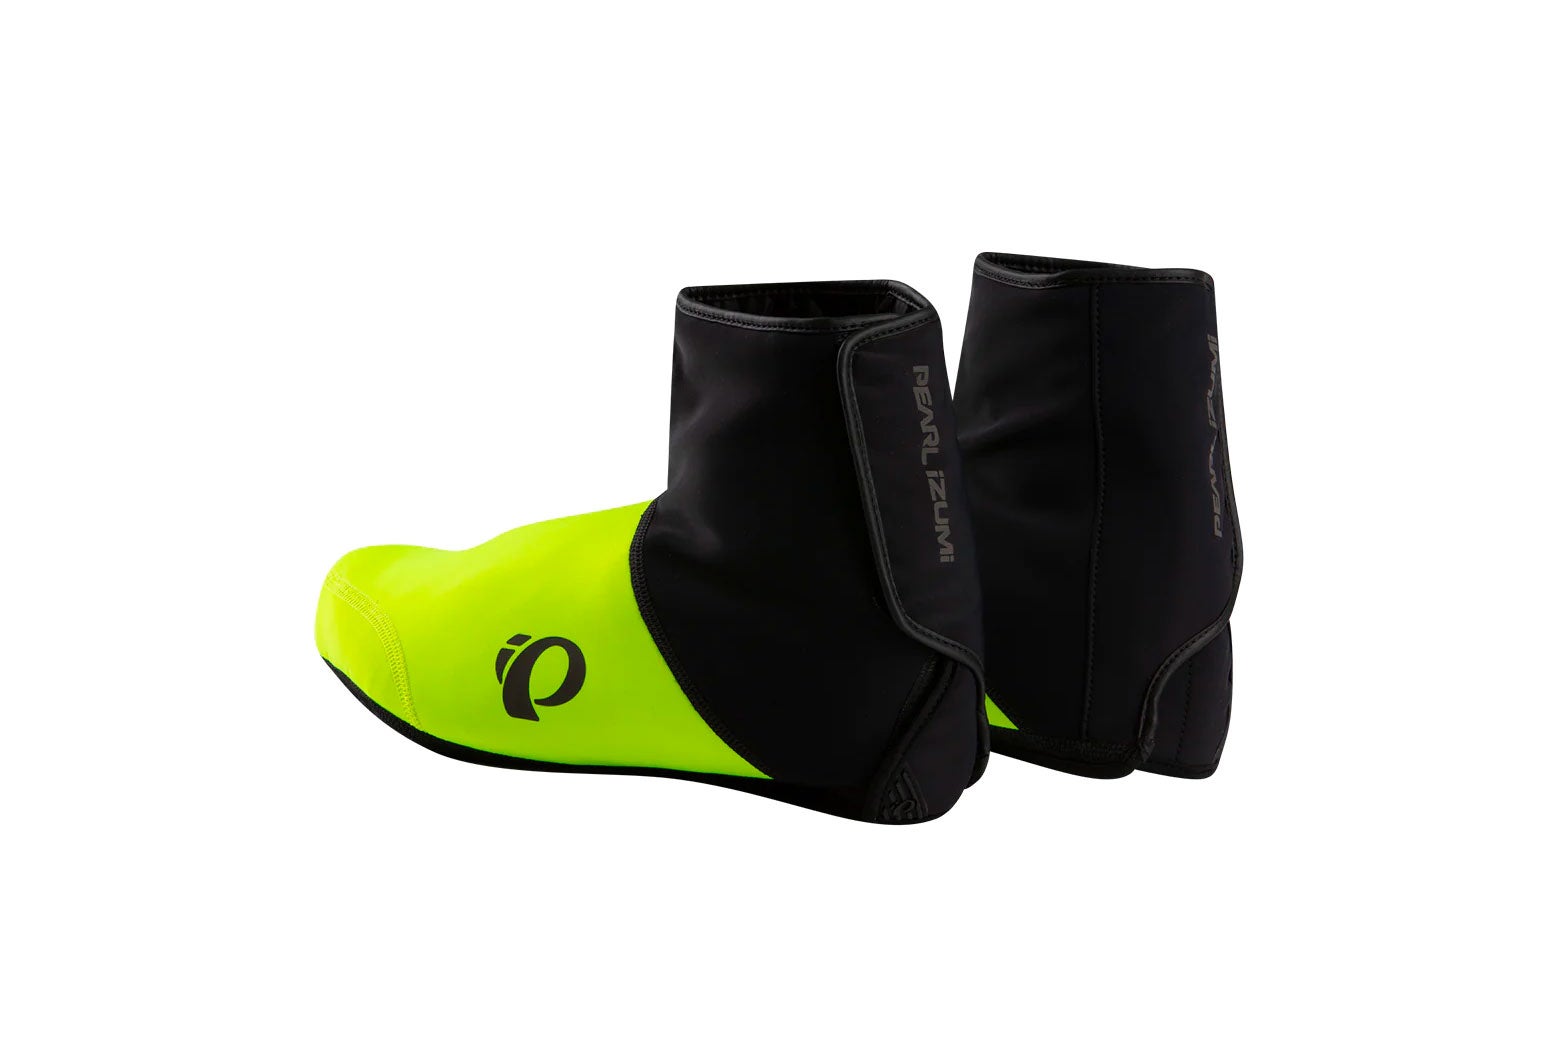 Neon green and black shoe wraps that fit biking shoes. 